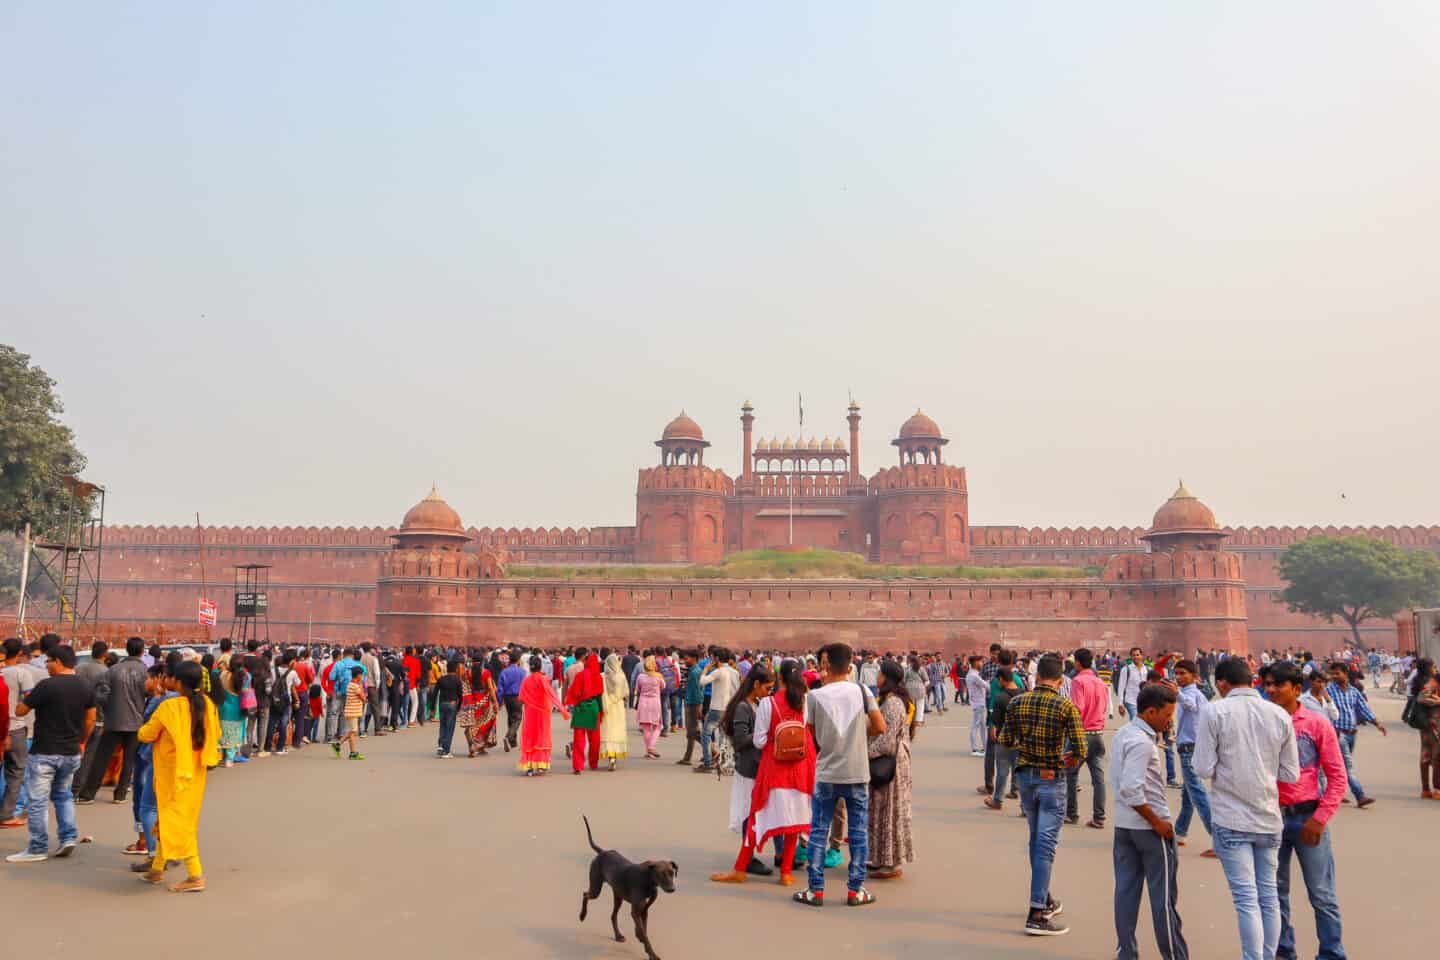 Delhi travel tips, Red Fort in Old Delhi with crowds